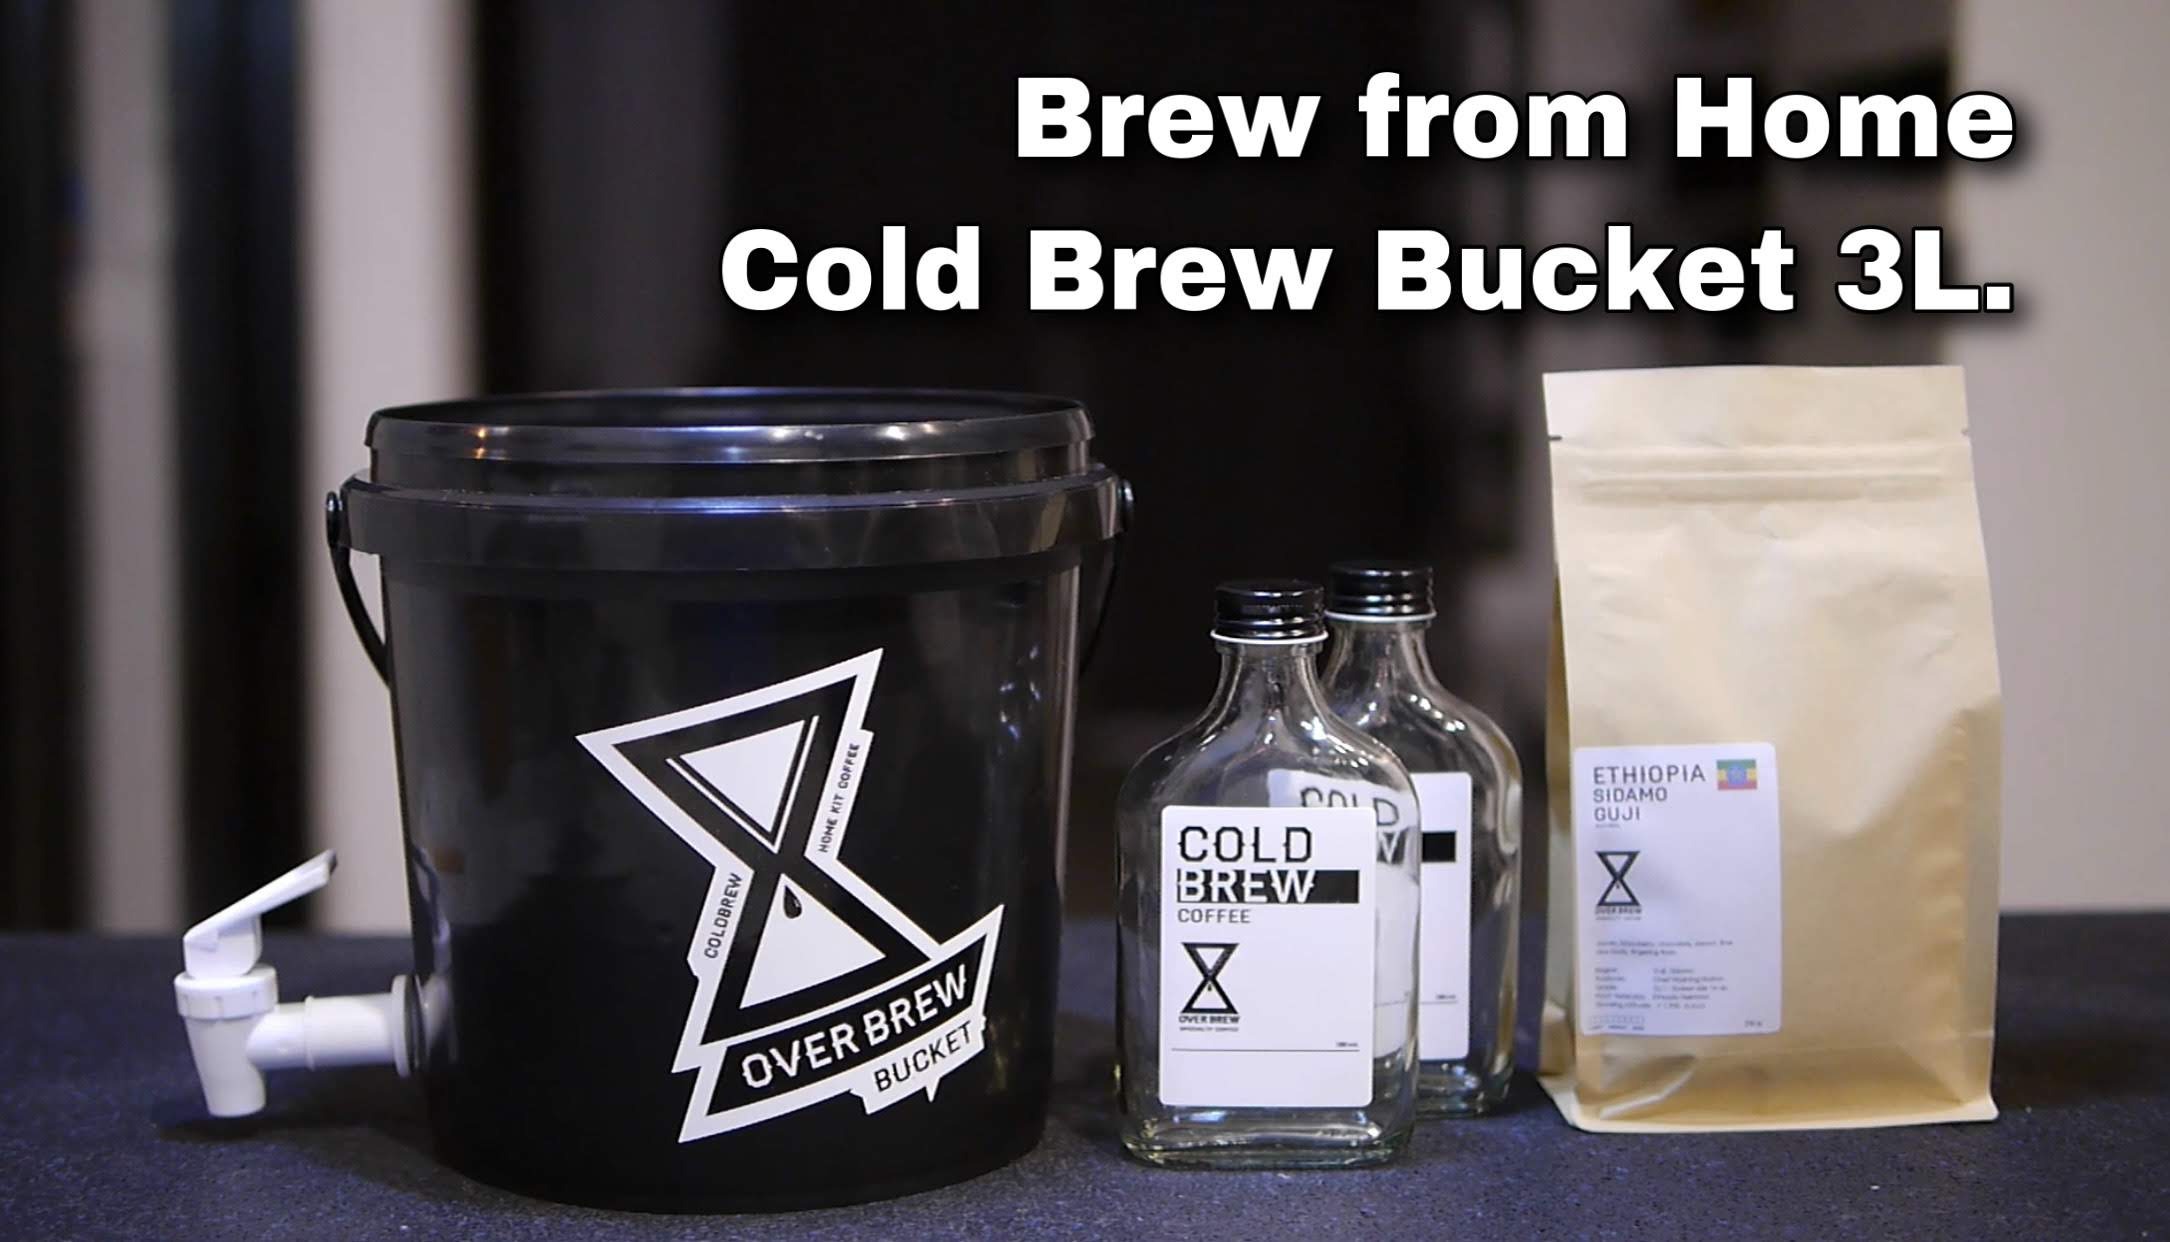 Cold Brew Bucket 3L. Home kit